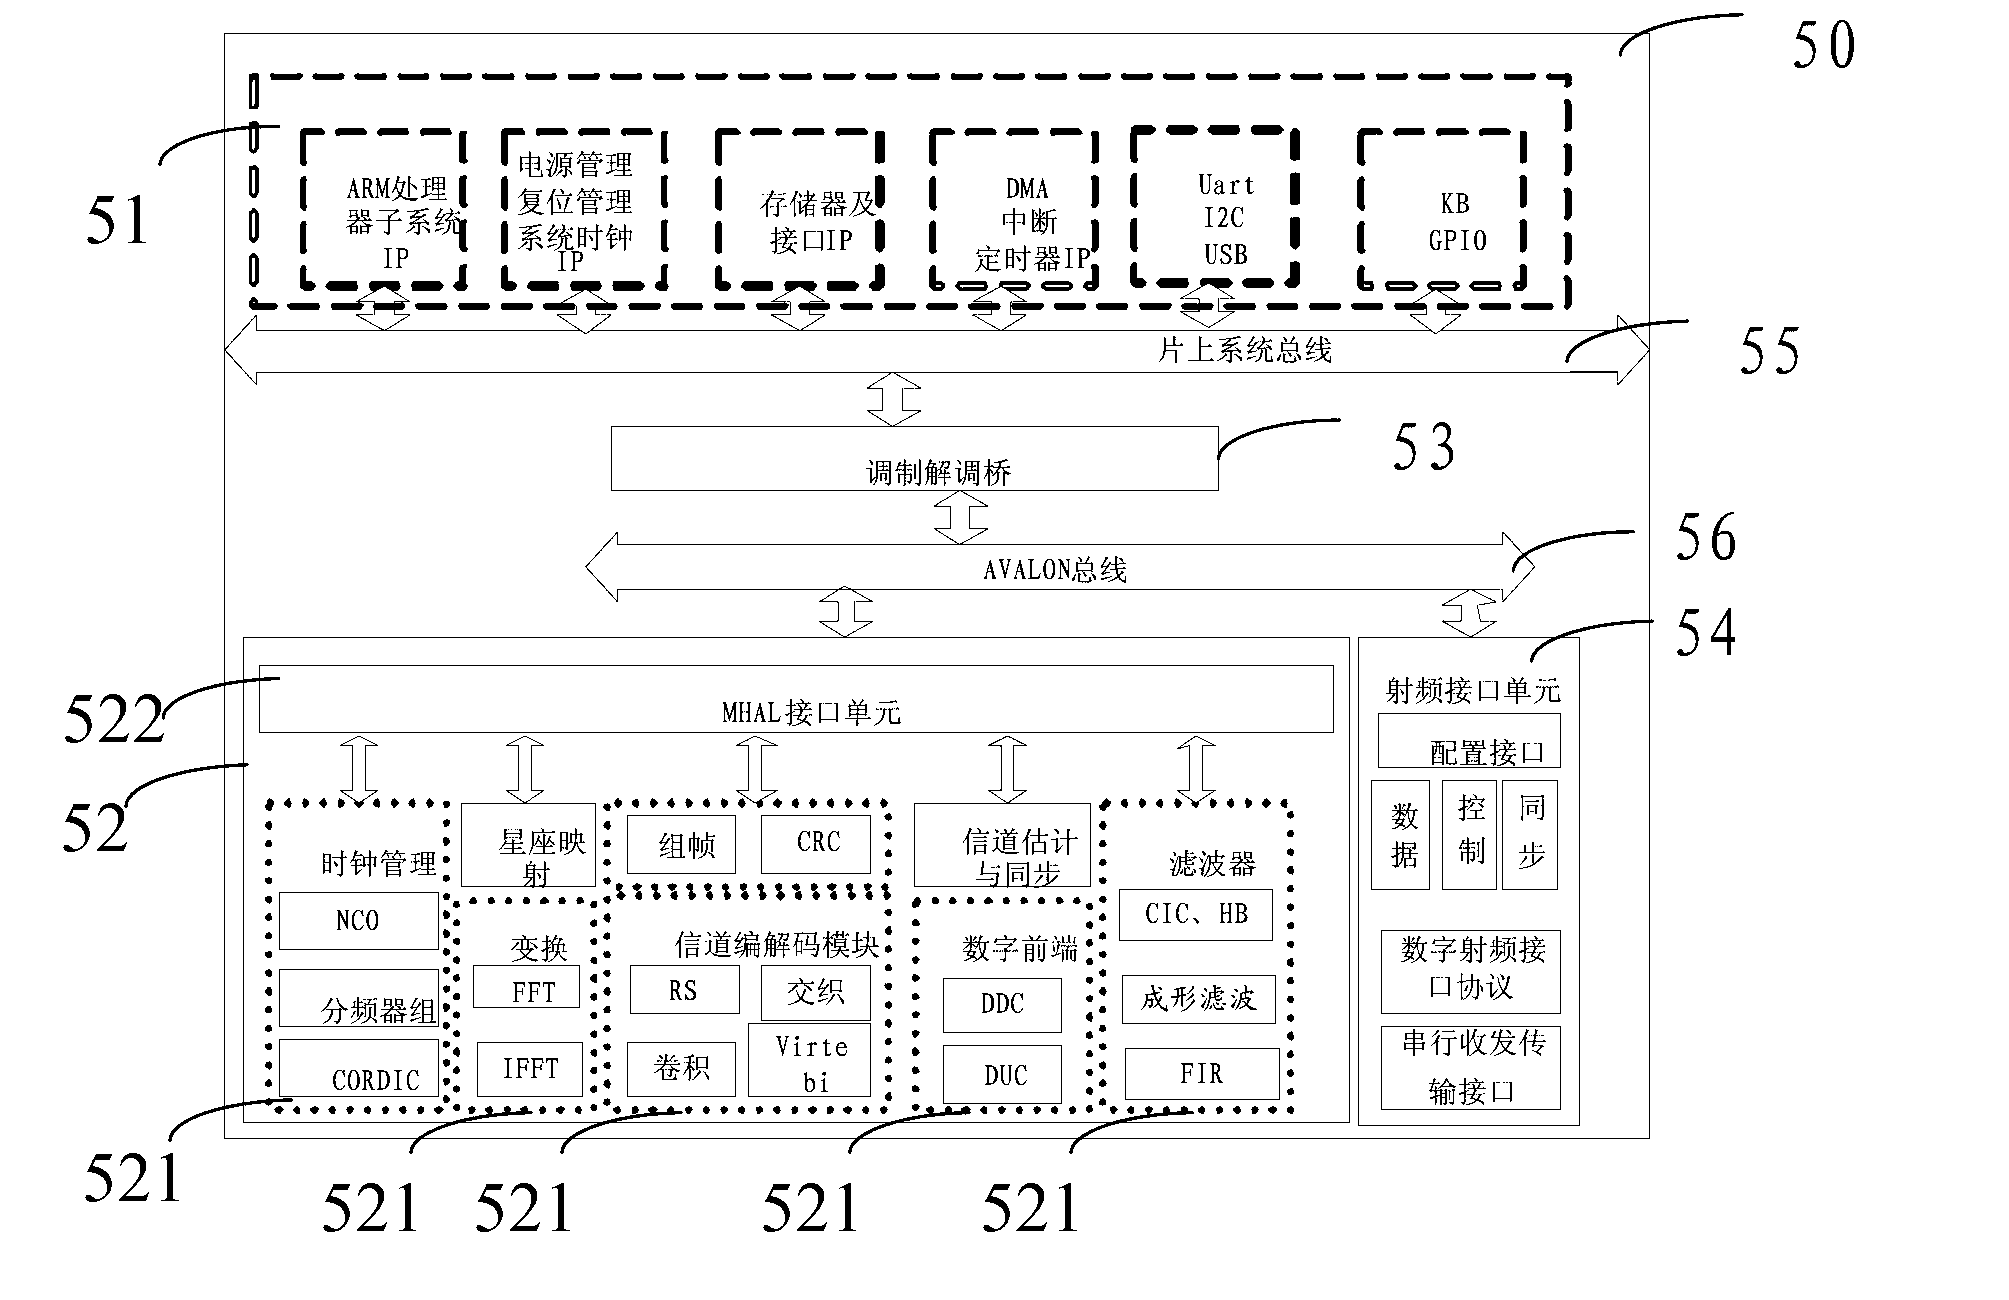 Modem component processing core and integrated circuit based on software communication architecture (SCA)